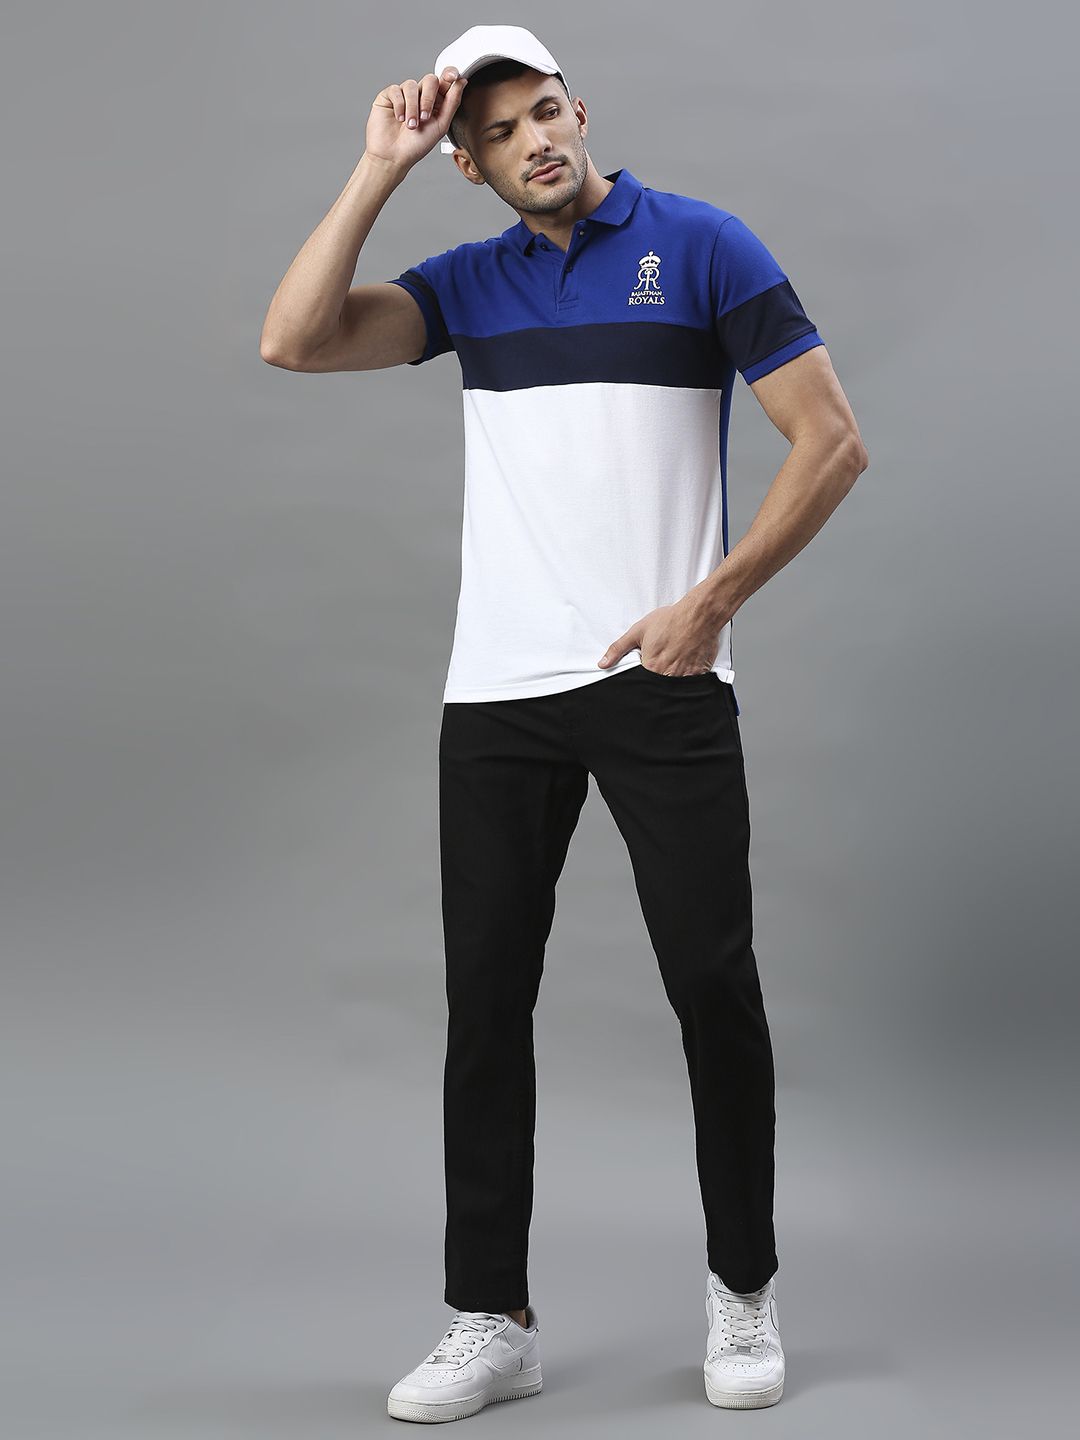 Buy Men White and Blue Printed Polo Collar Polos From Fancode Shop.